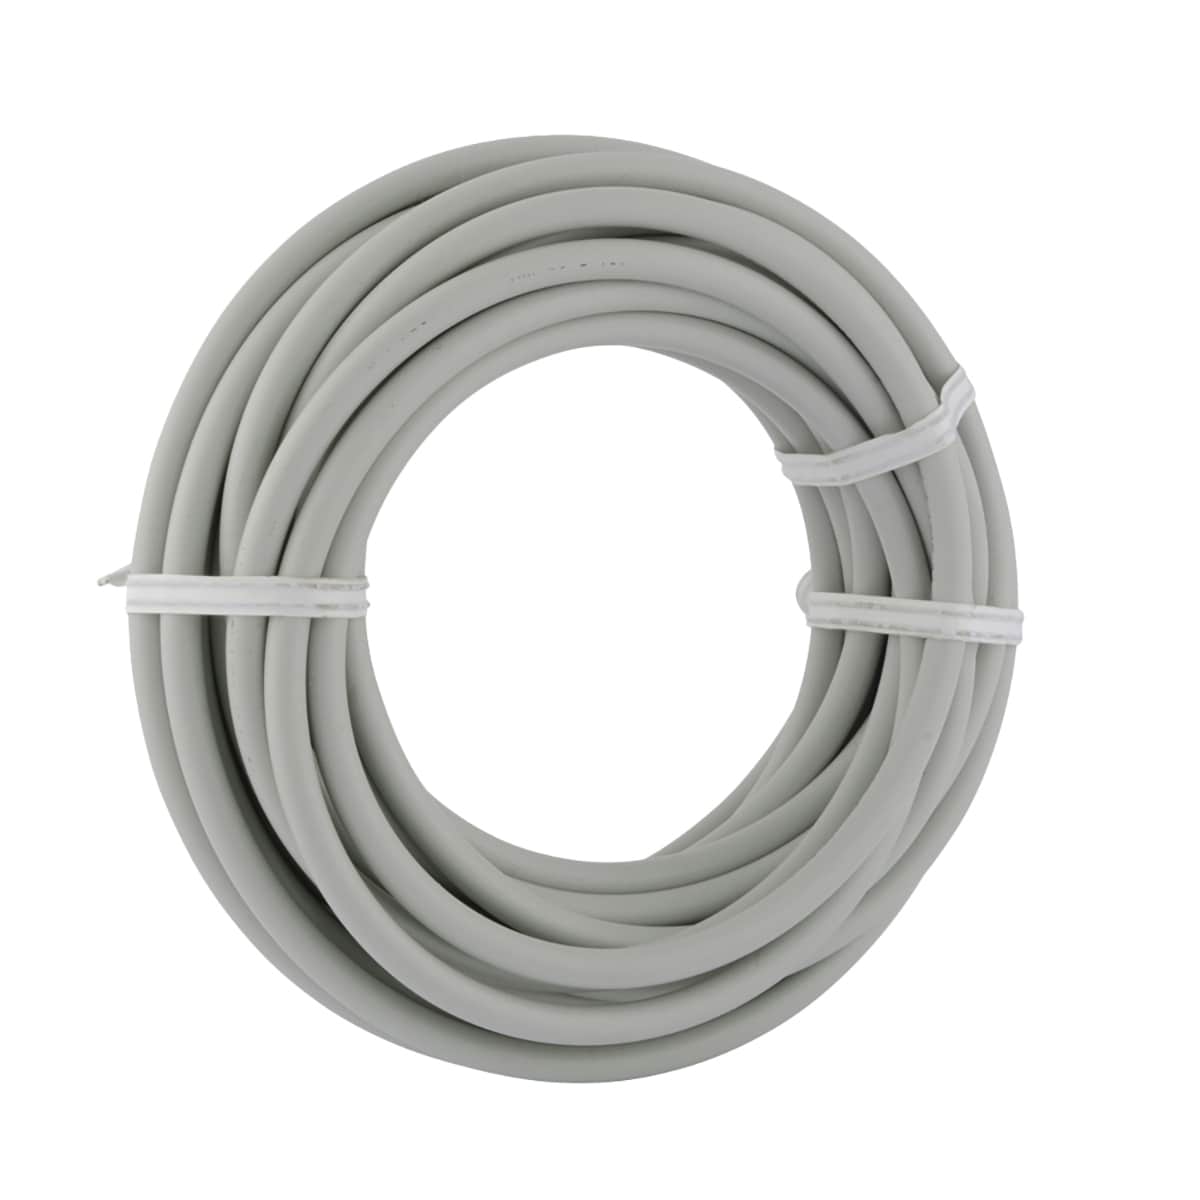 Maytag 25 PEX Tubing Ice/Water Kit-W10267701RP, Fred's Appliance